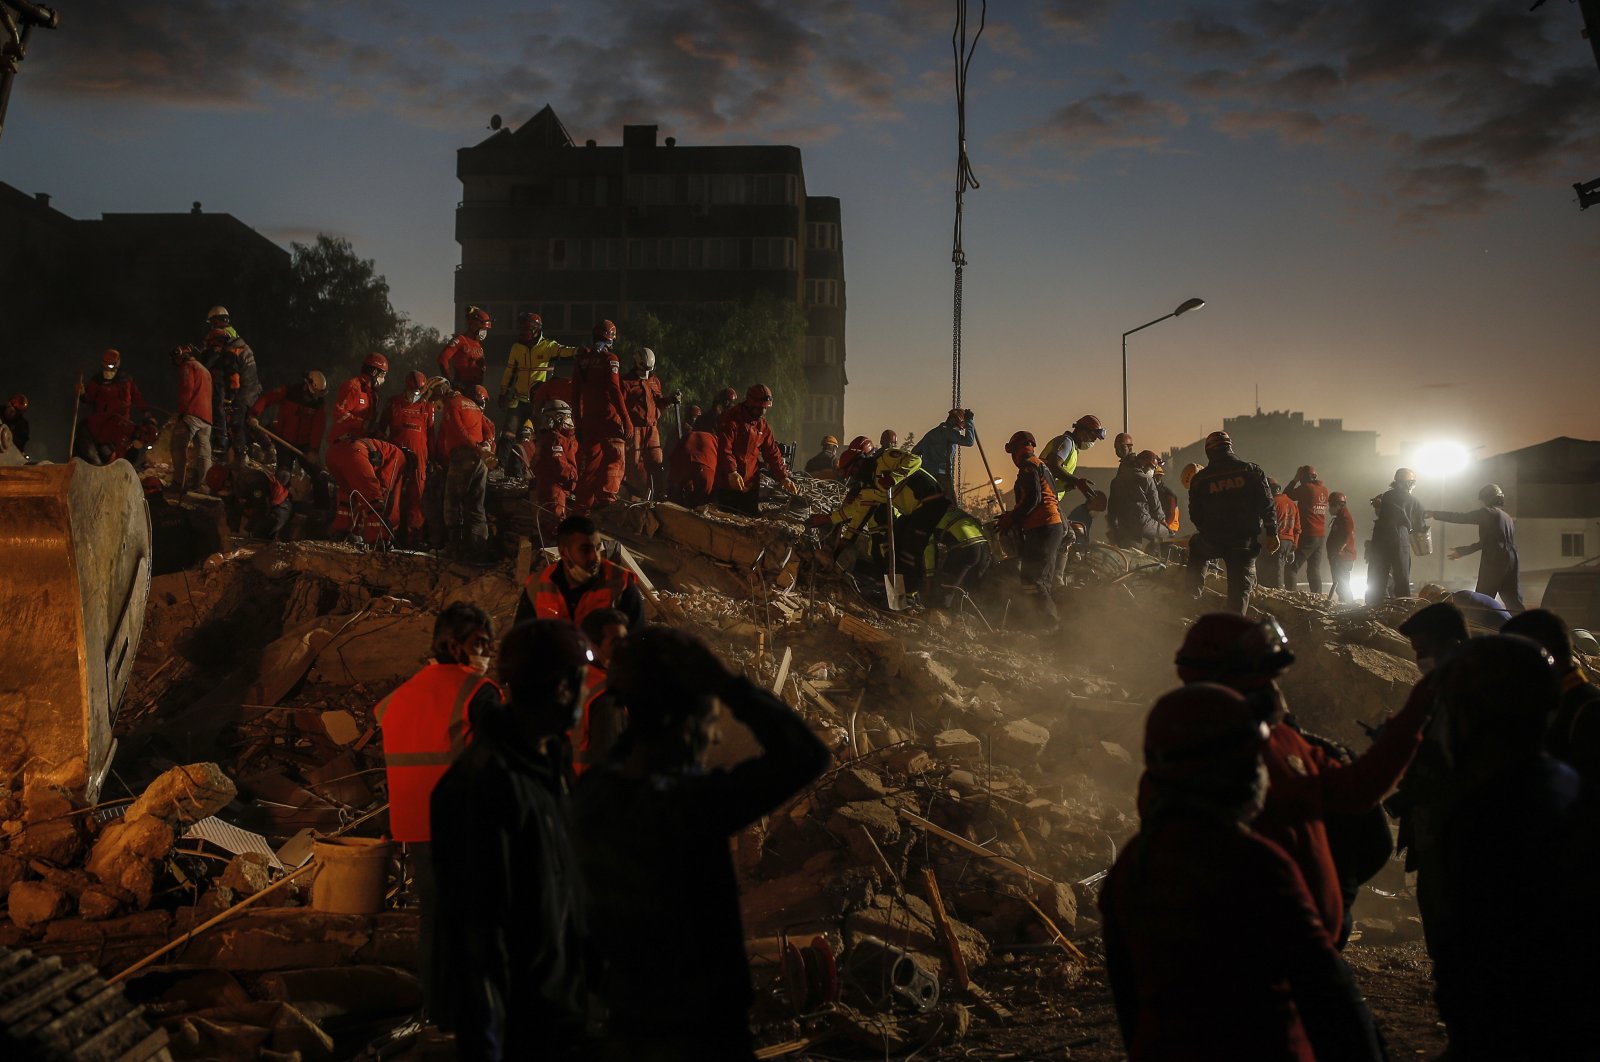 Members of rescue services search for survivors in the debris of a collapsed building in Izmir, Turkey, Nov. 2, 2020. (AP Photo)